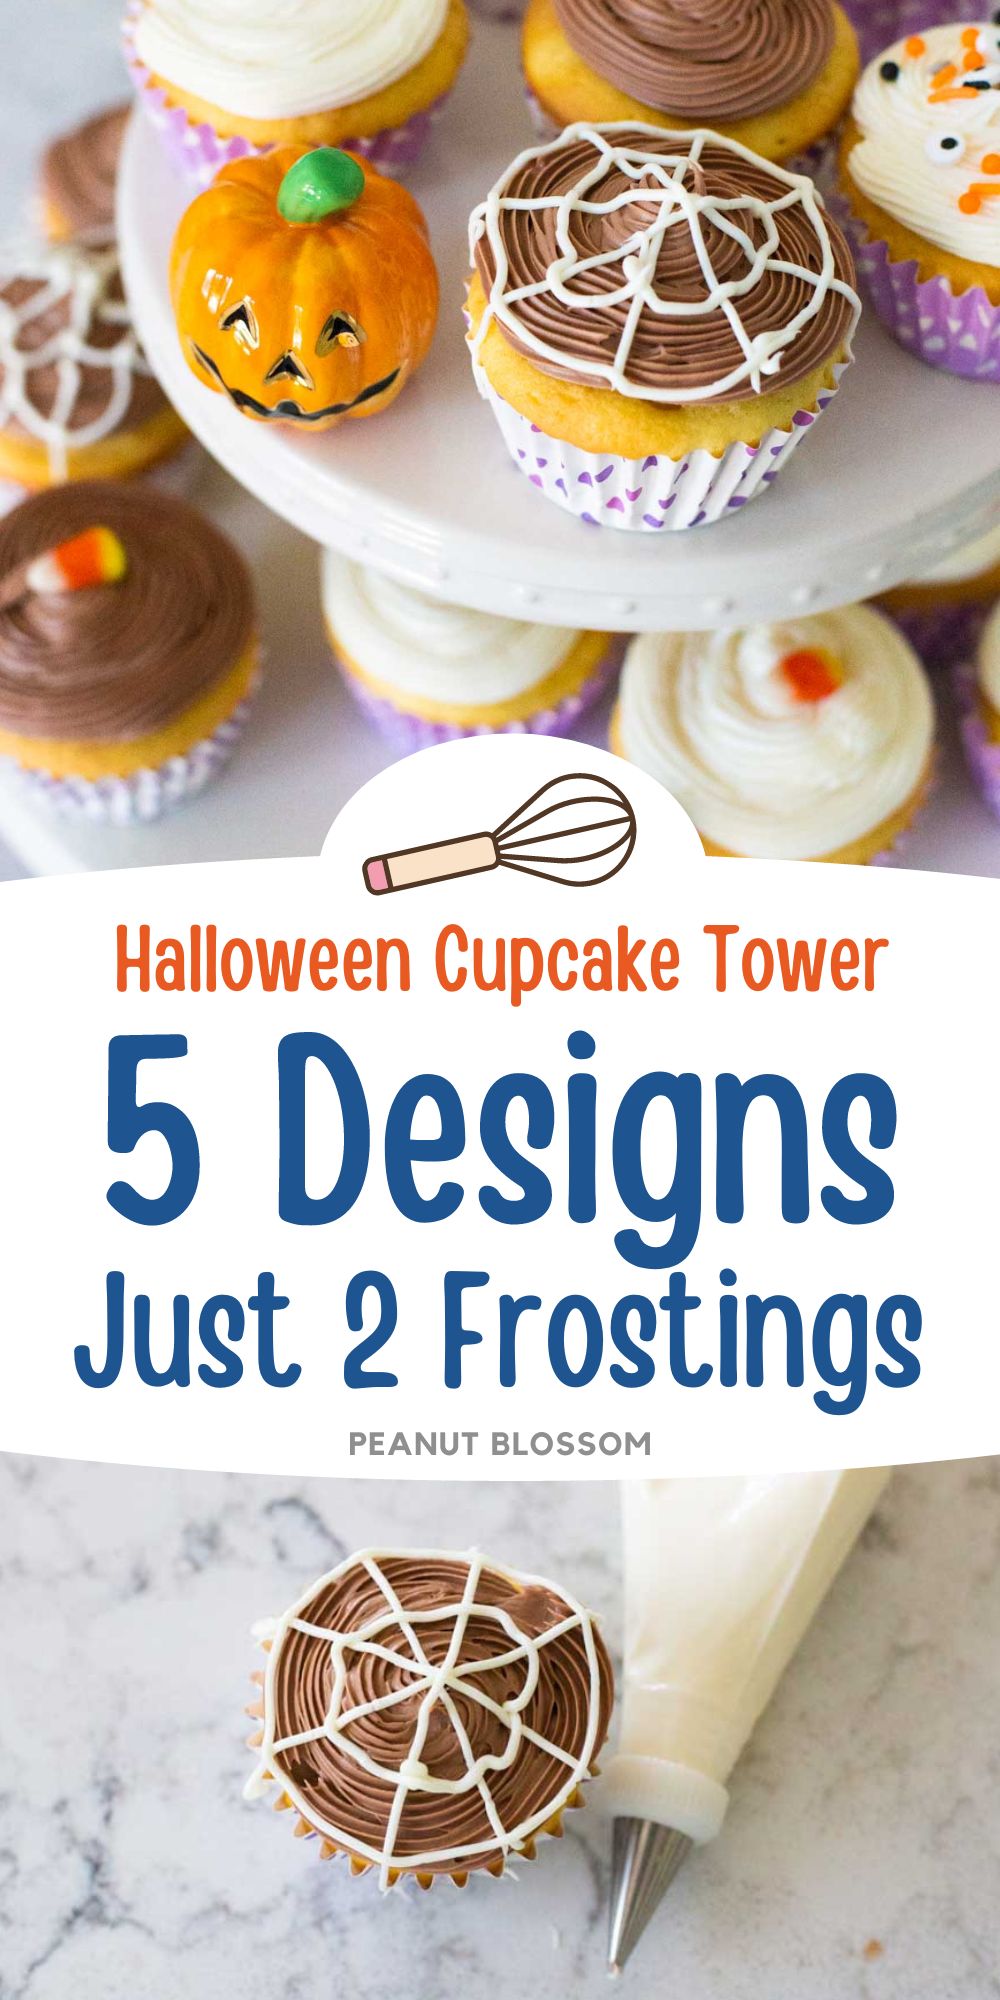 The photo collage shows the Halloween cupcakes on a party platter next to a photo of one of the cupcakes with a spider web design.